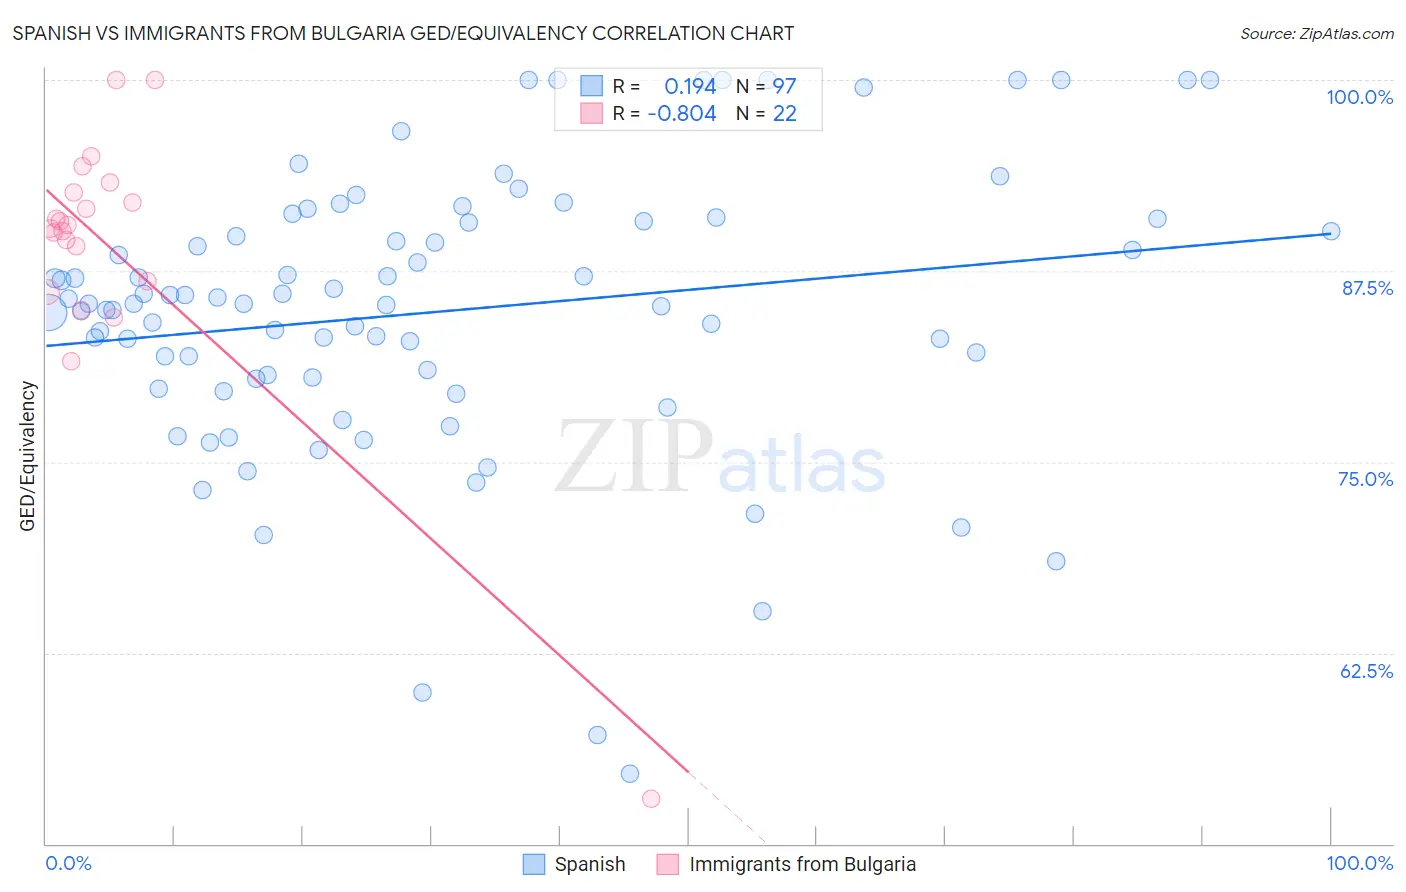 Spanish vs Immigrants from Bulgaria GED/Equivalency